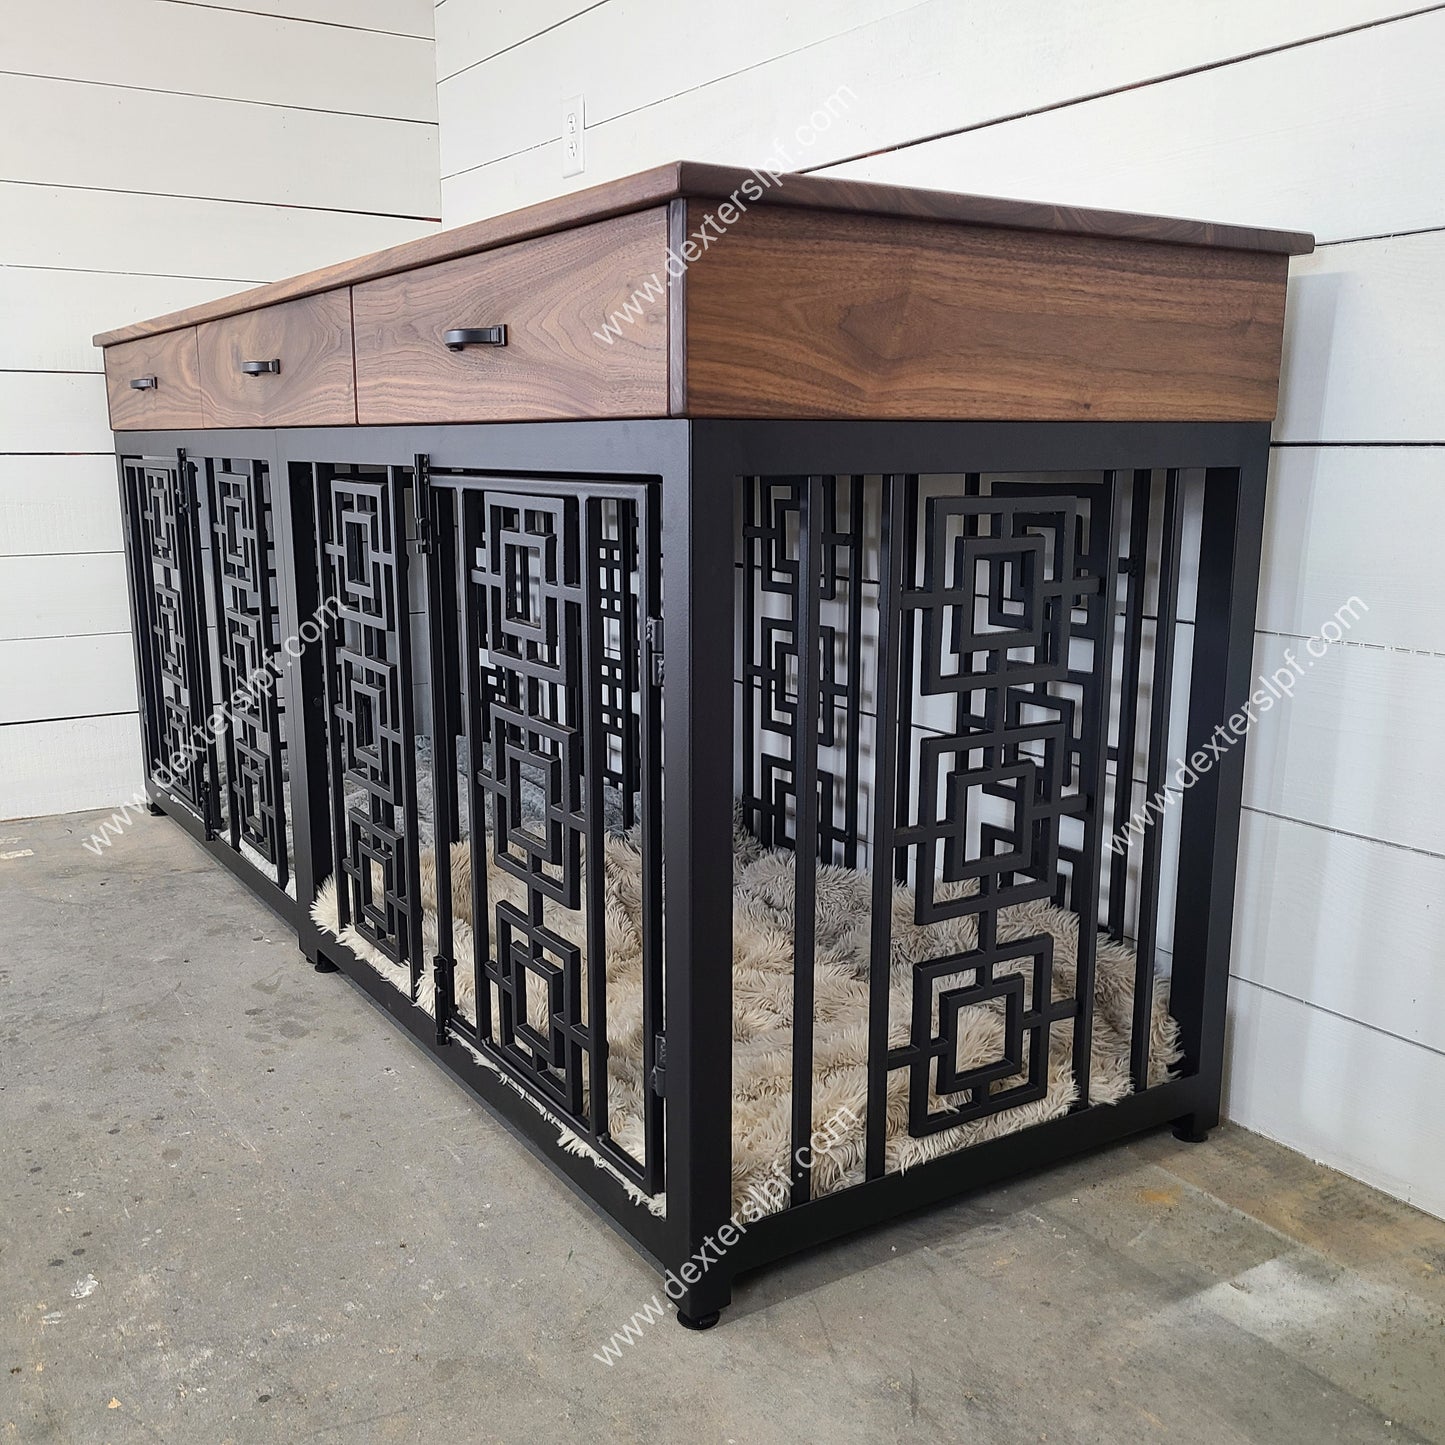 Sebby  Large Double with Drawers, Large Double Dog Crate, Dog Crate Furniture, Dog Kennel Furniture, Dog Crate